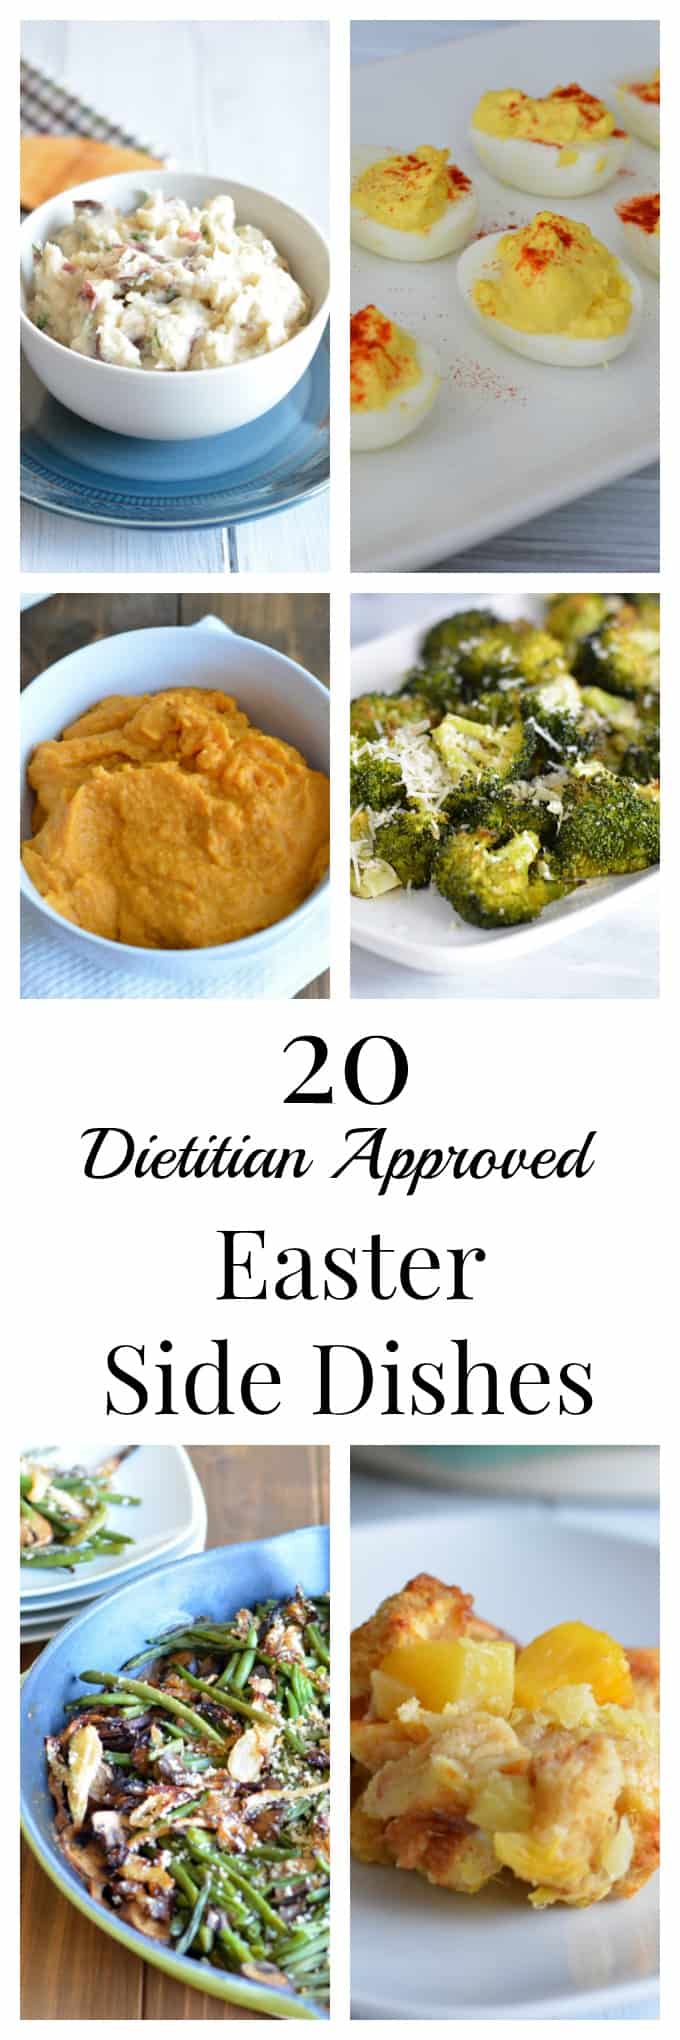 20 Dietitian Approved Easter Side Dishes